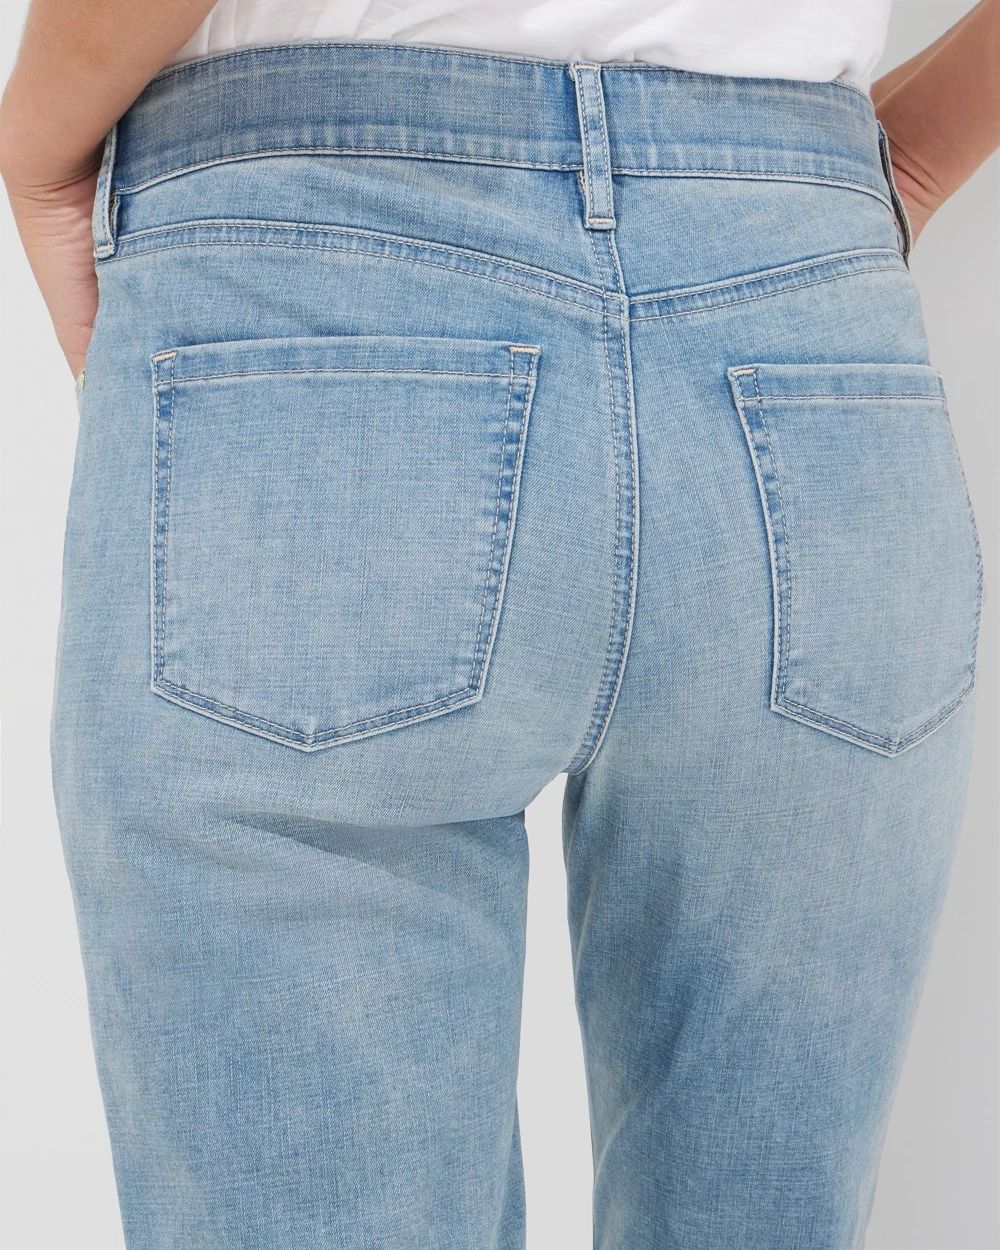 Outlet WHBM Mid-Rise Girlfriend Jeans click to view larger image.